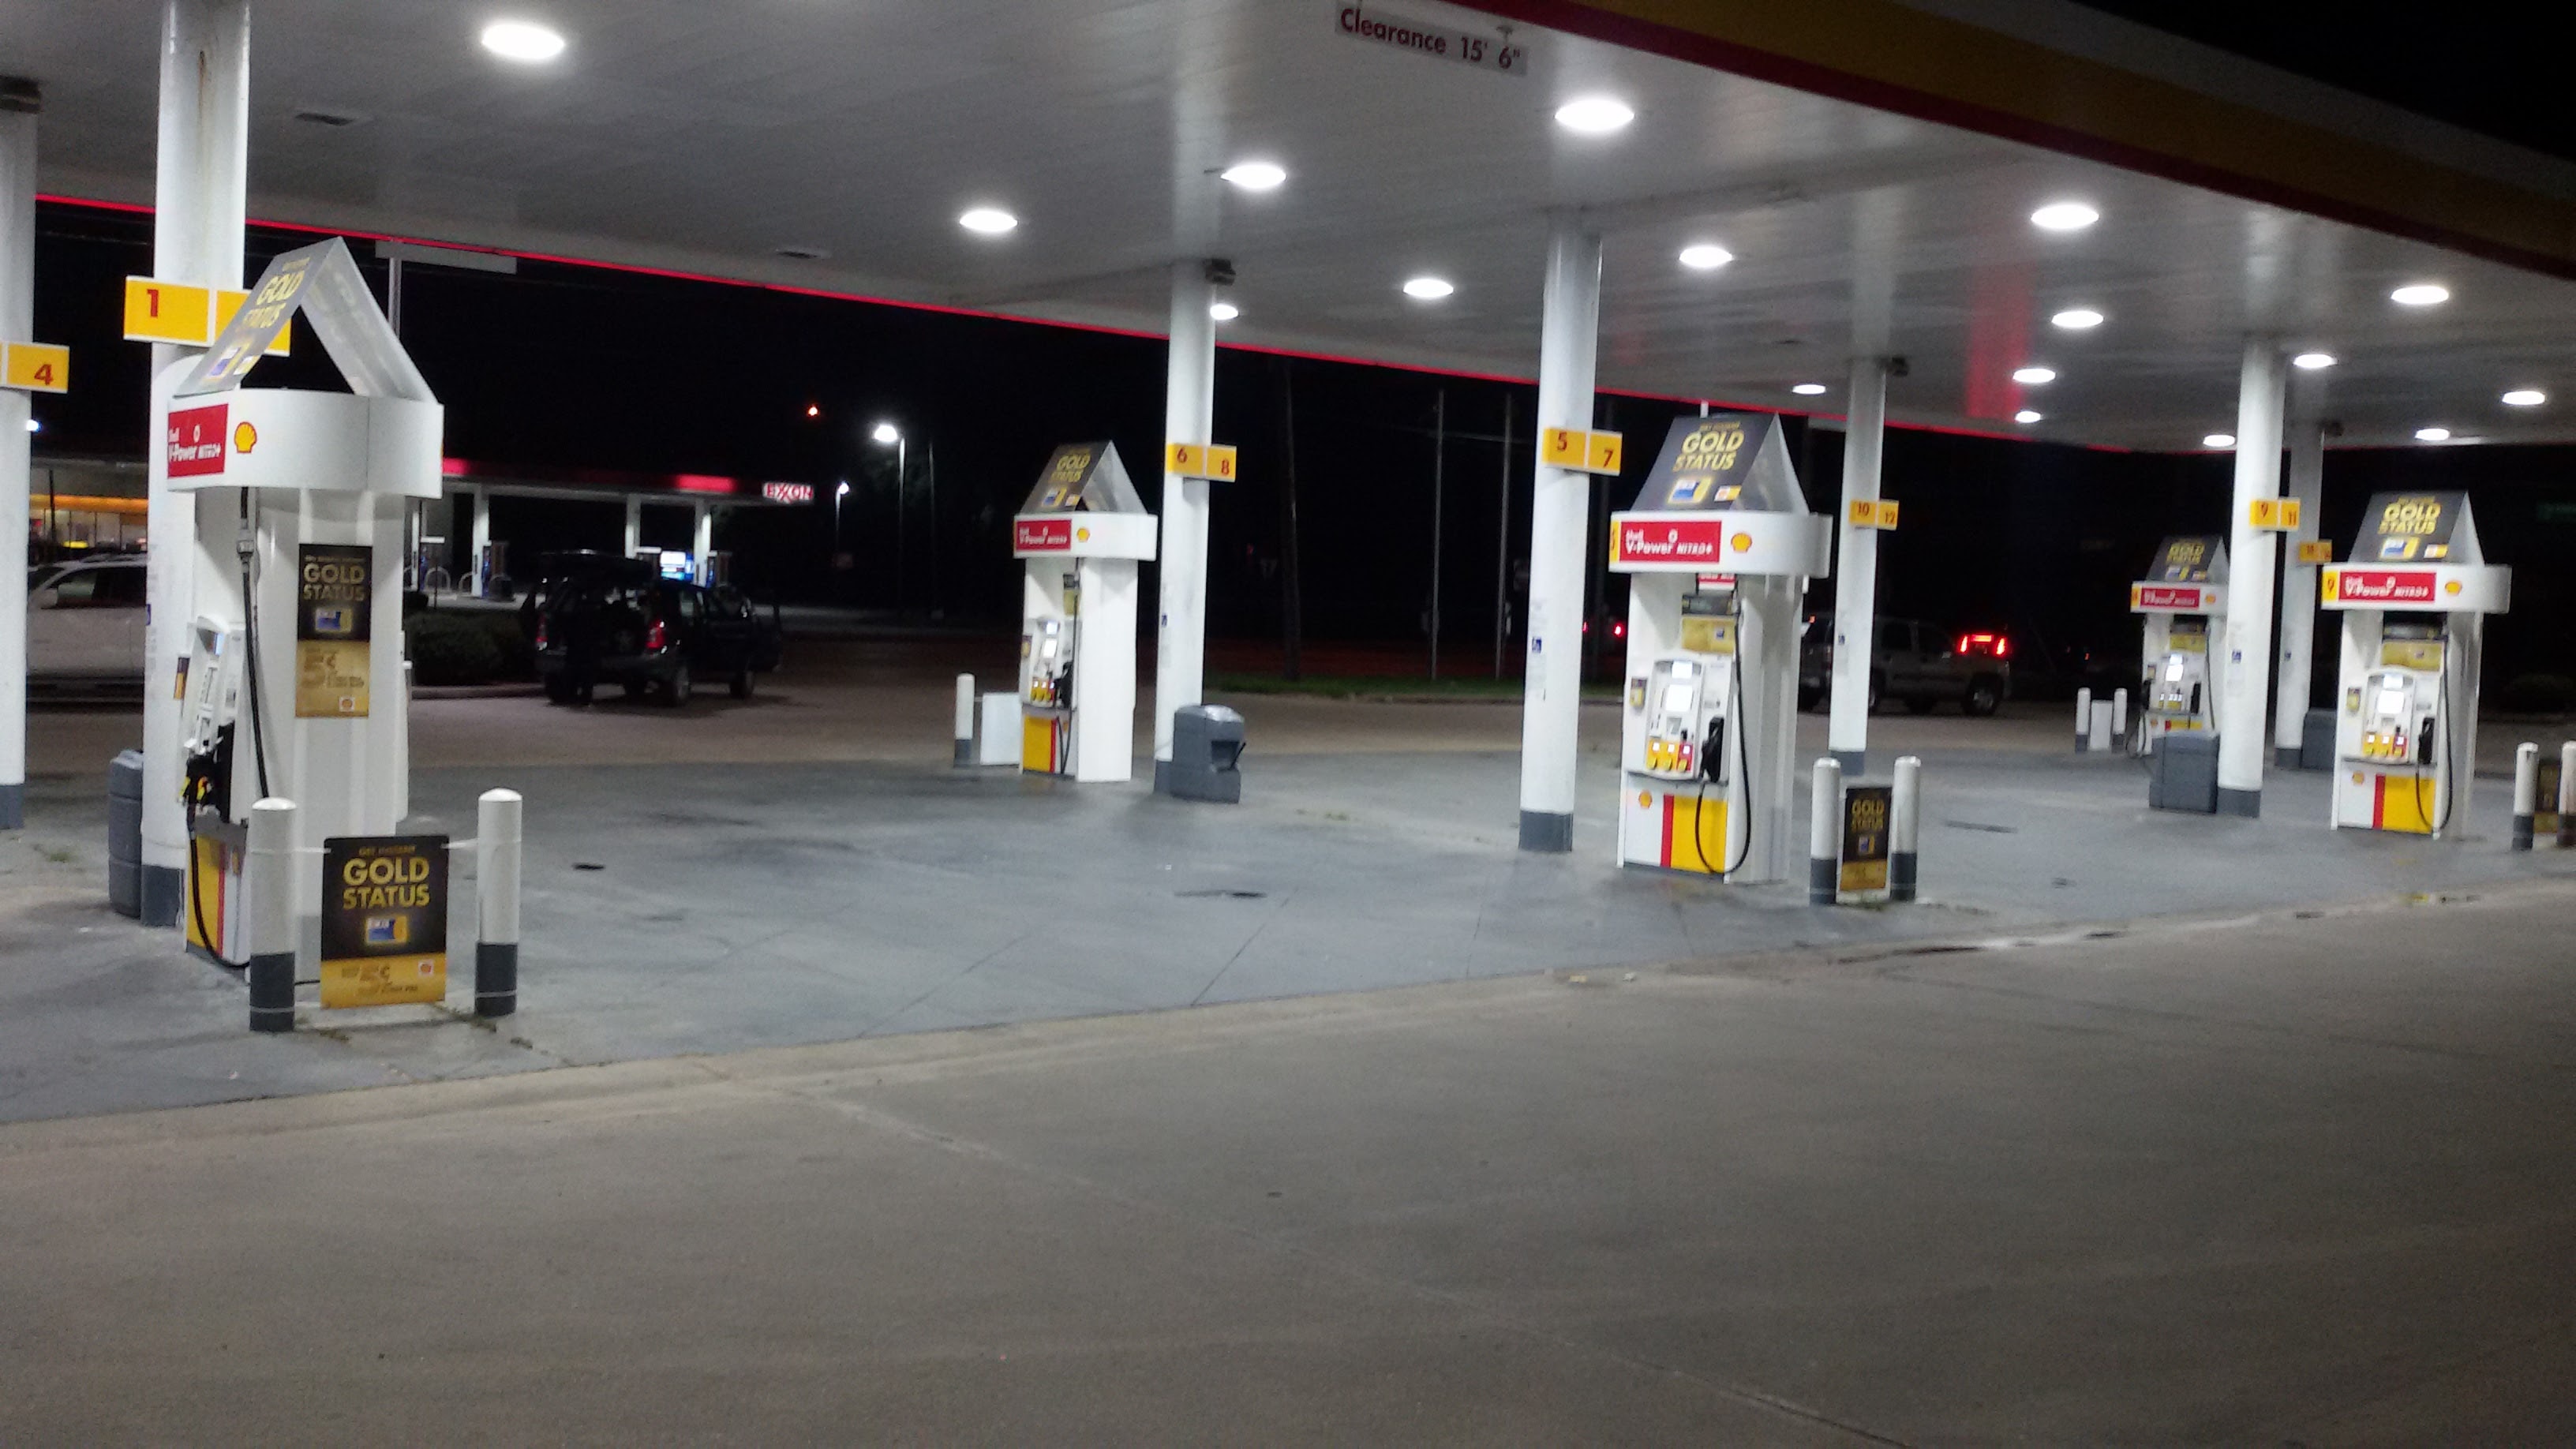 Shell - Houston (TX 77075), US, gas station close to me